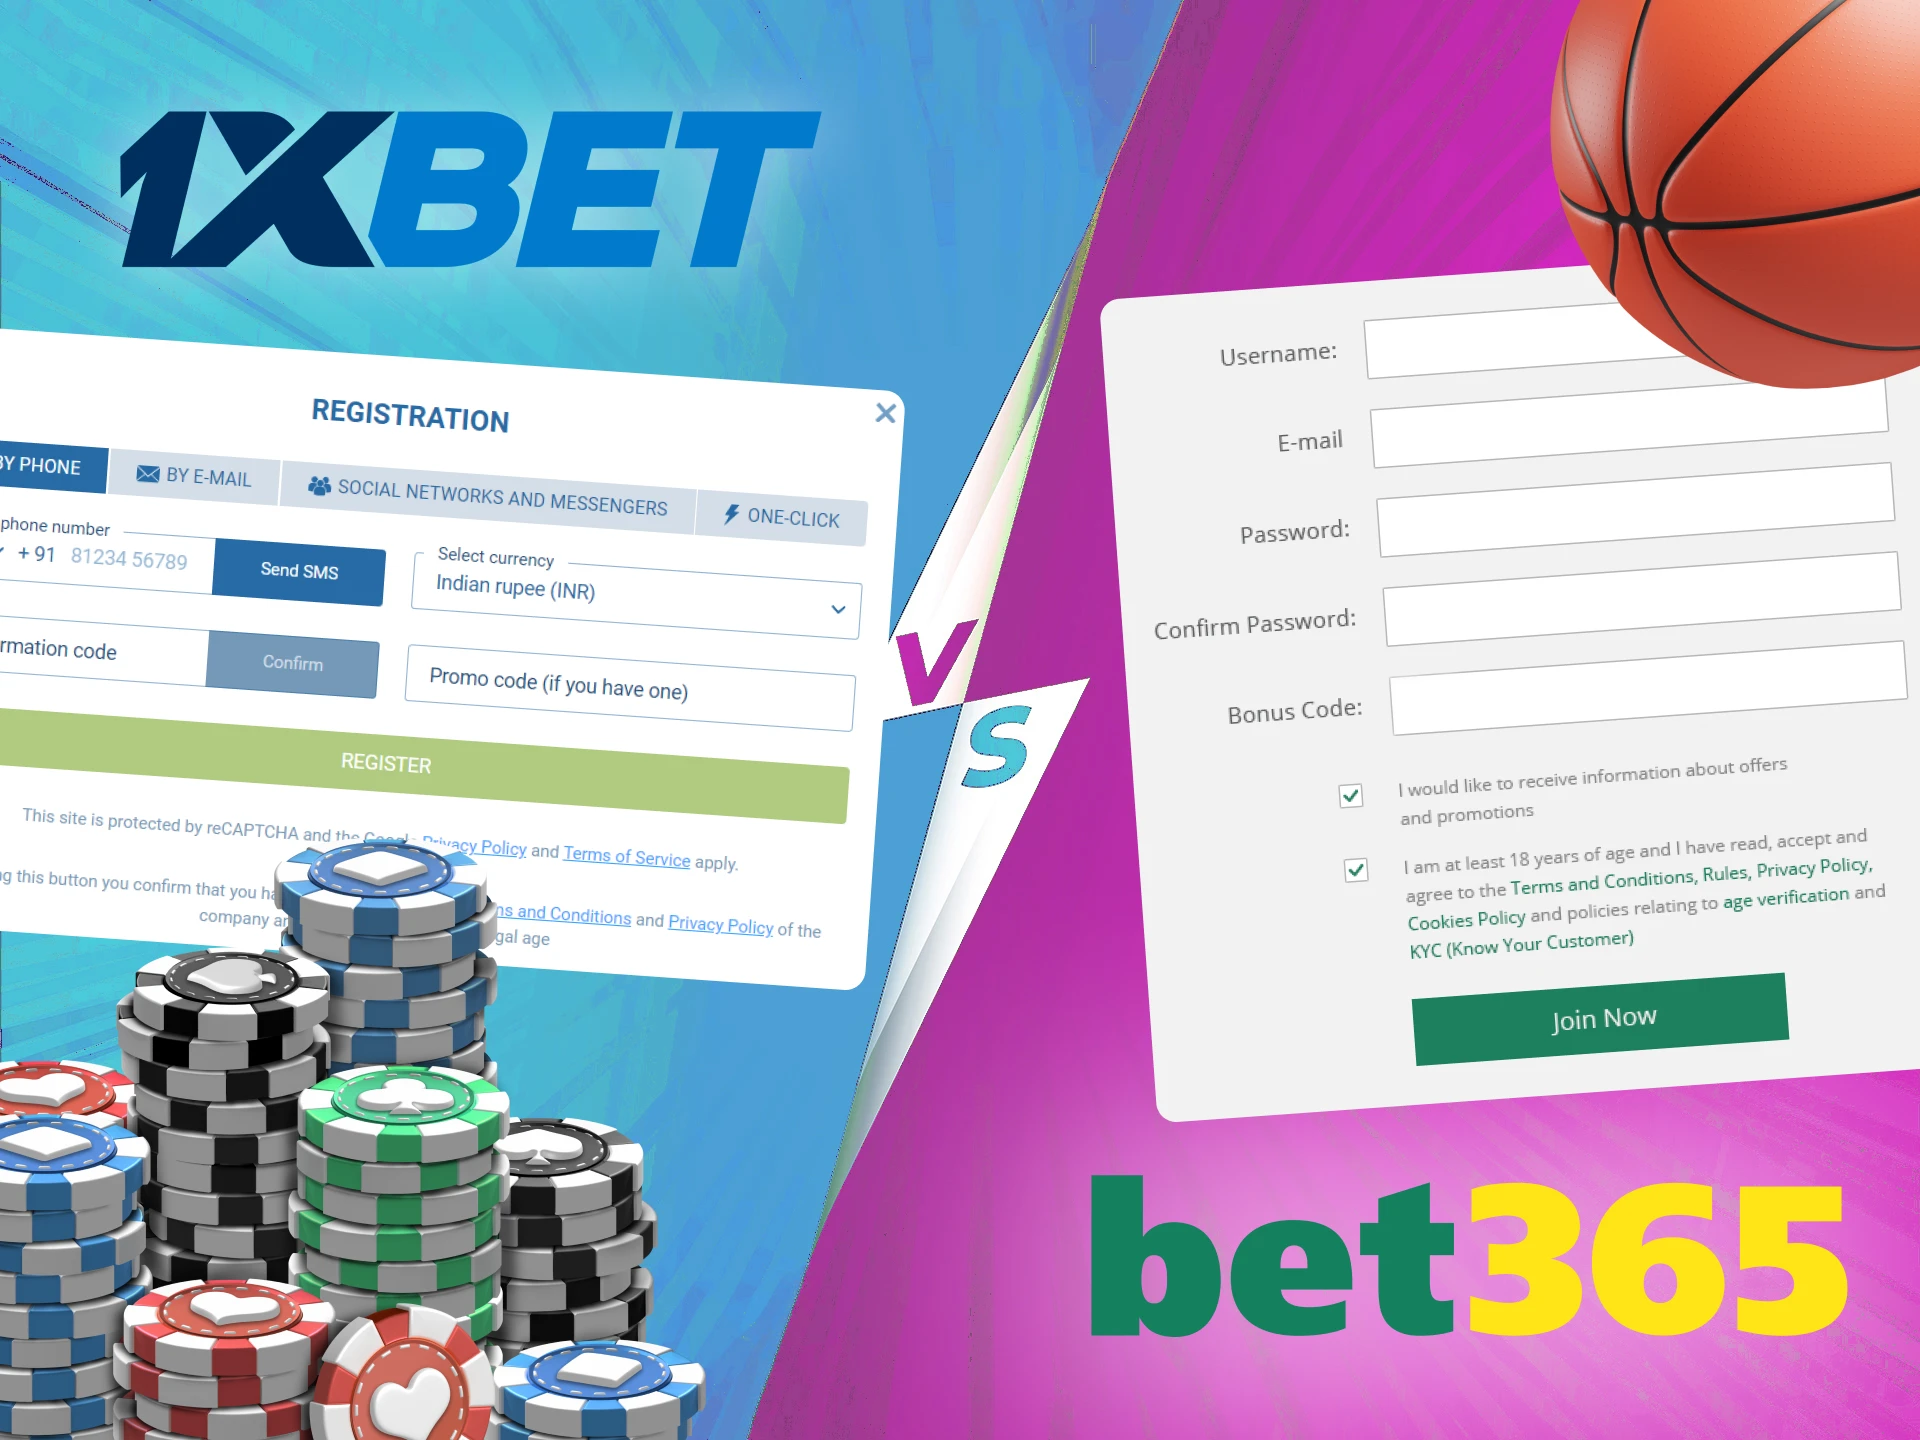 Register at 1xbet or bet365 to start betting.